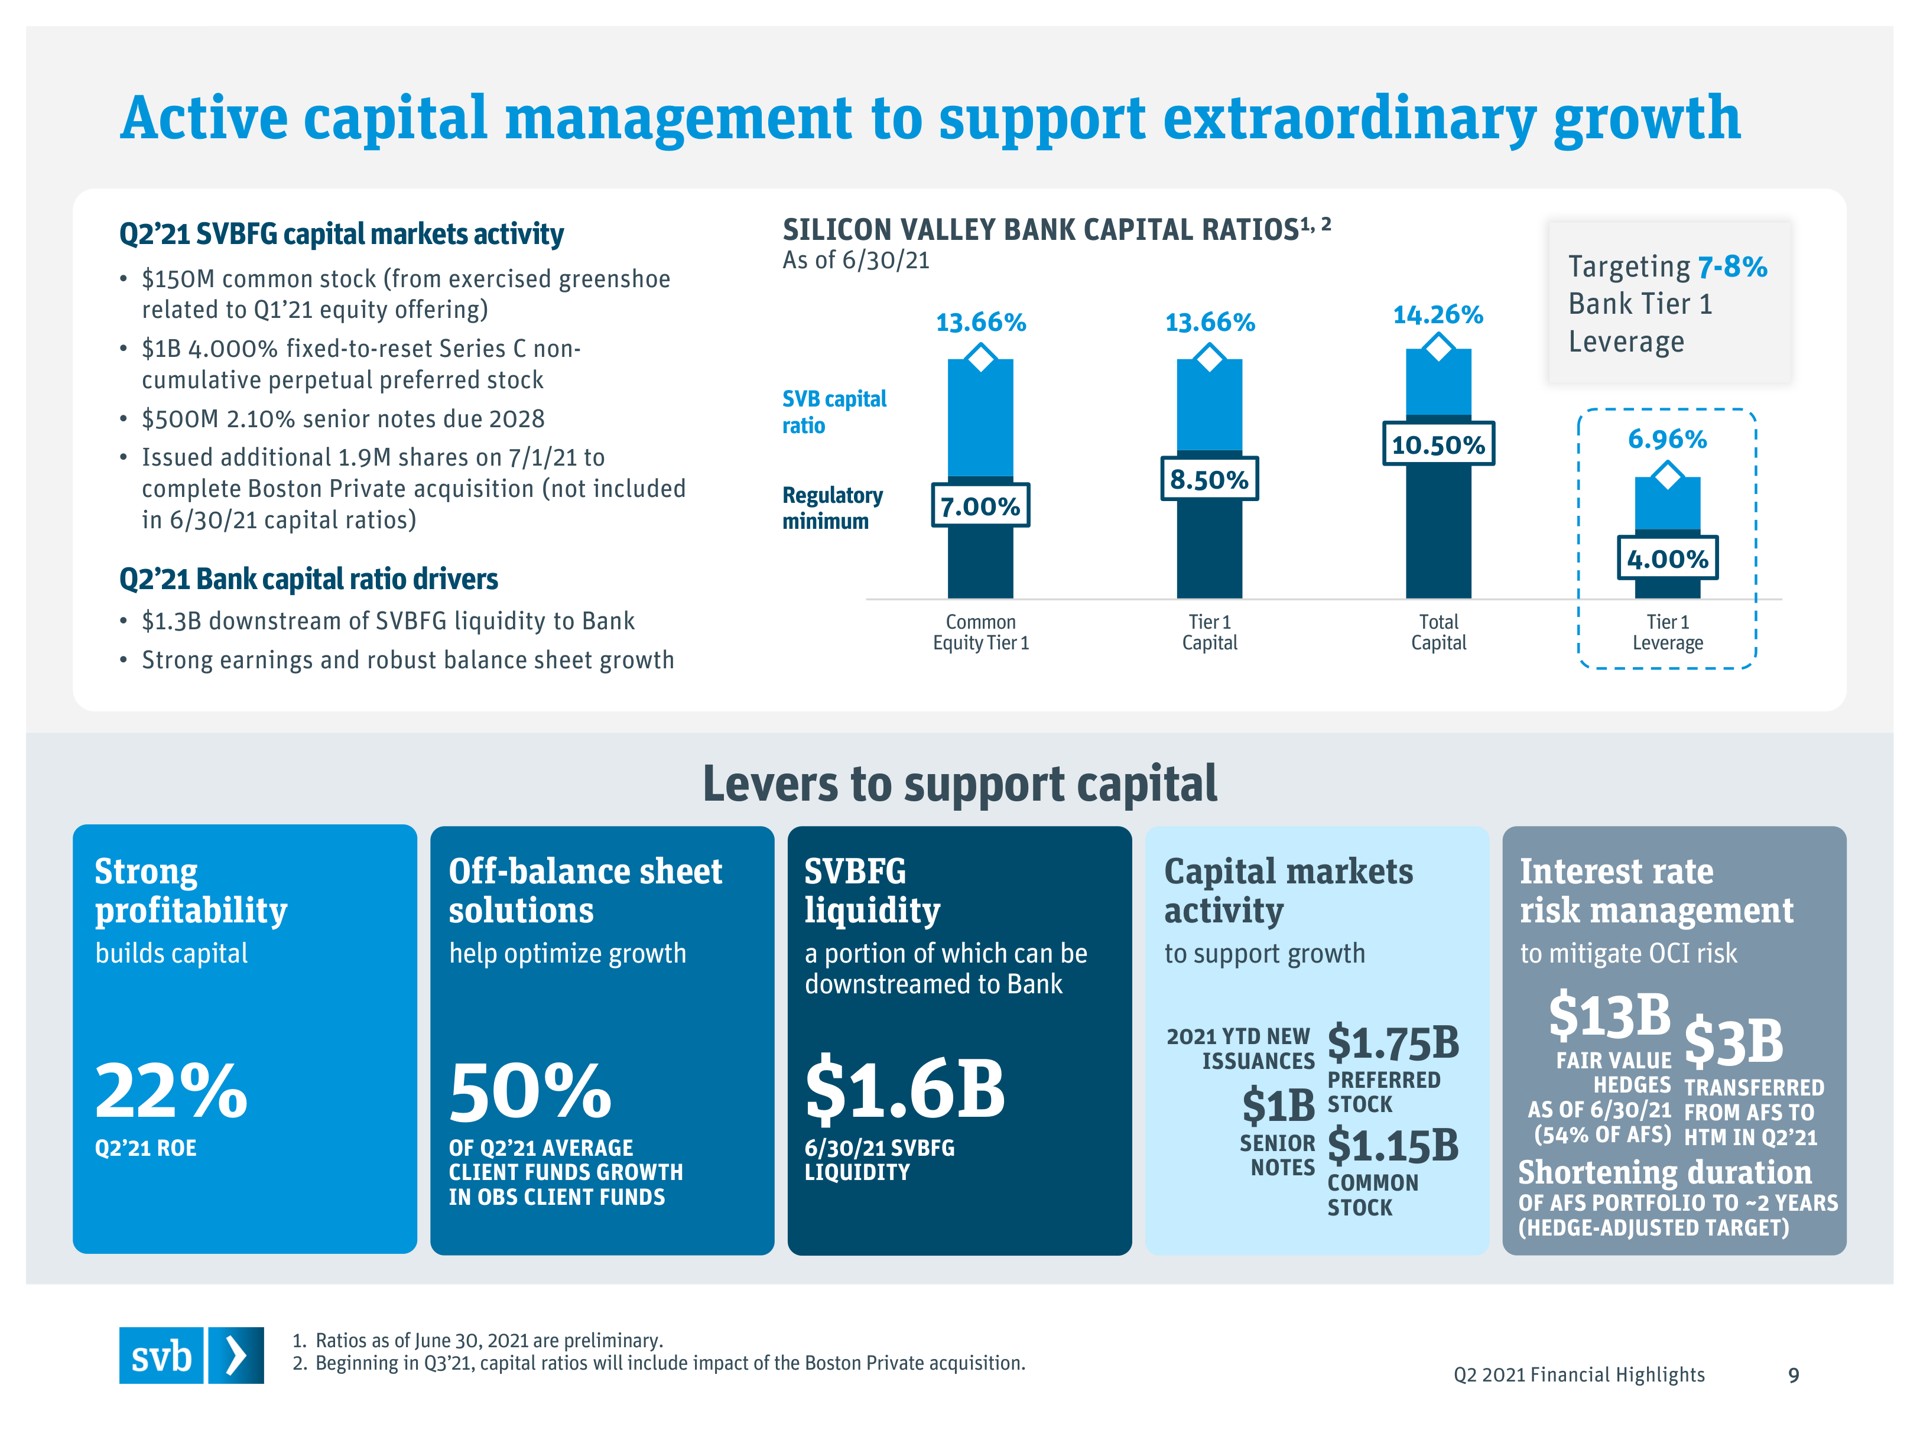 active capital management to support extraordinary growth levers to support capital notes i | Silicon Valley Bank